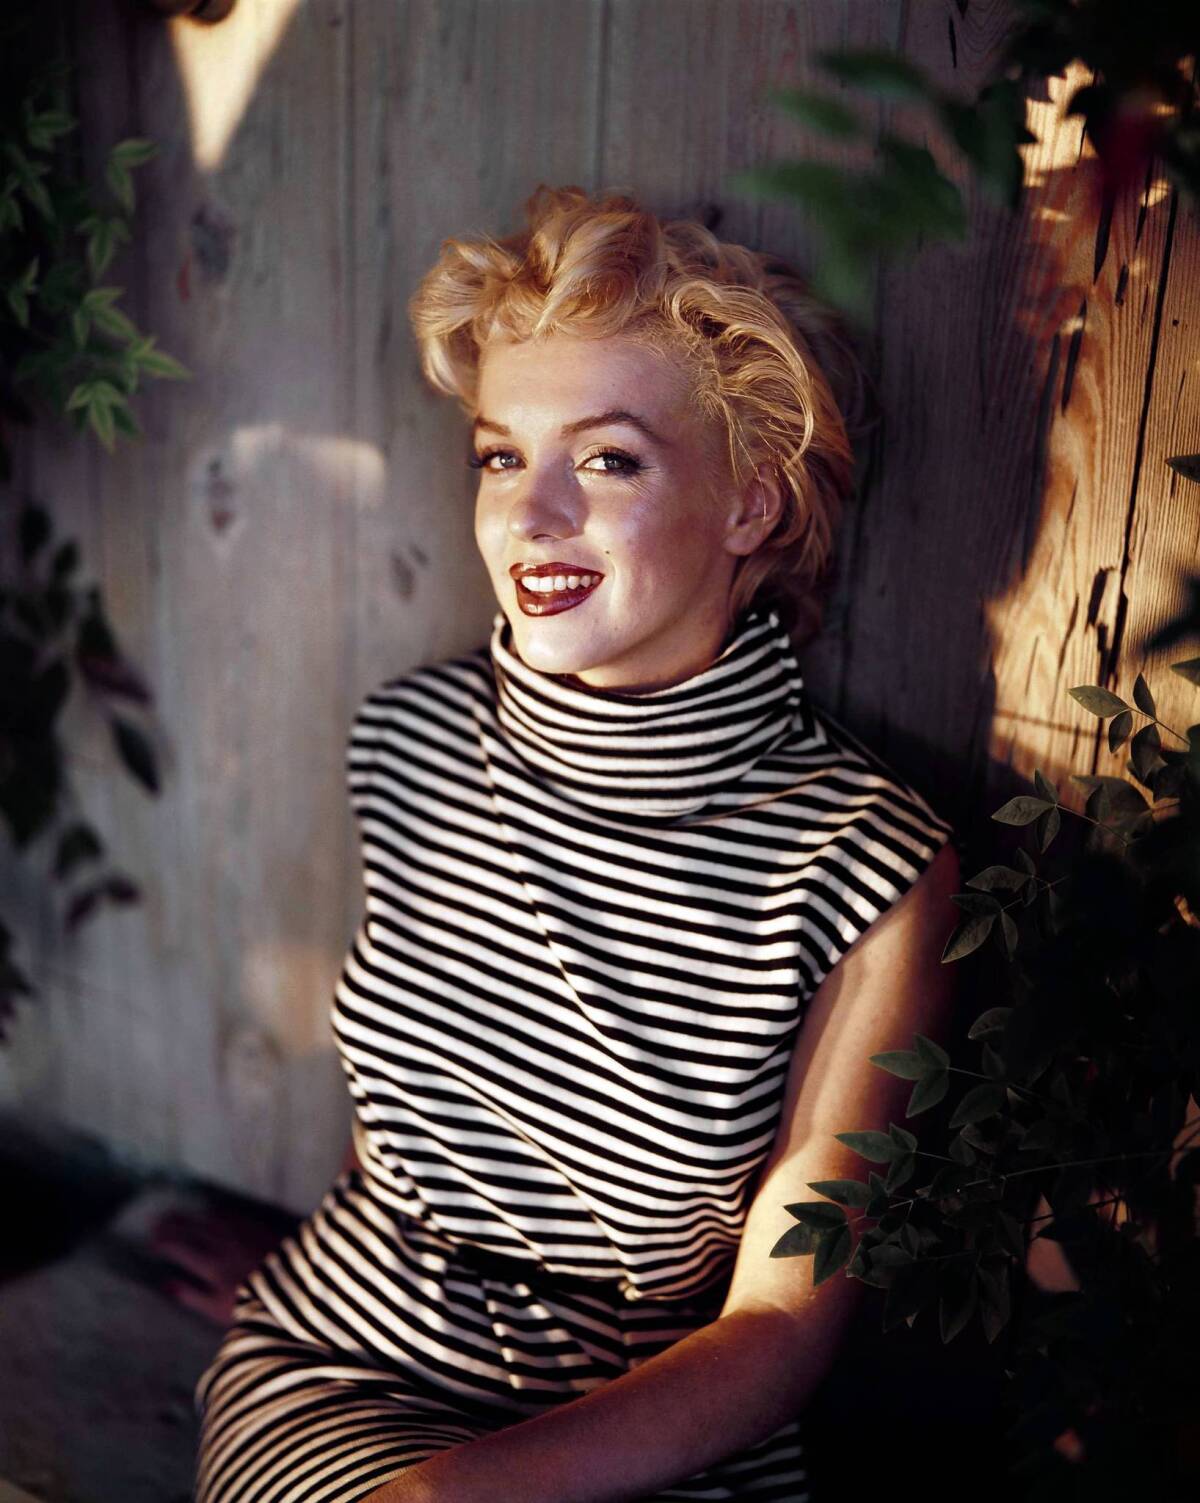 Photos from Marilyn Monroe's Most Iconic Fashion Looks